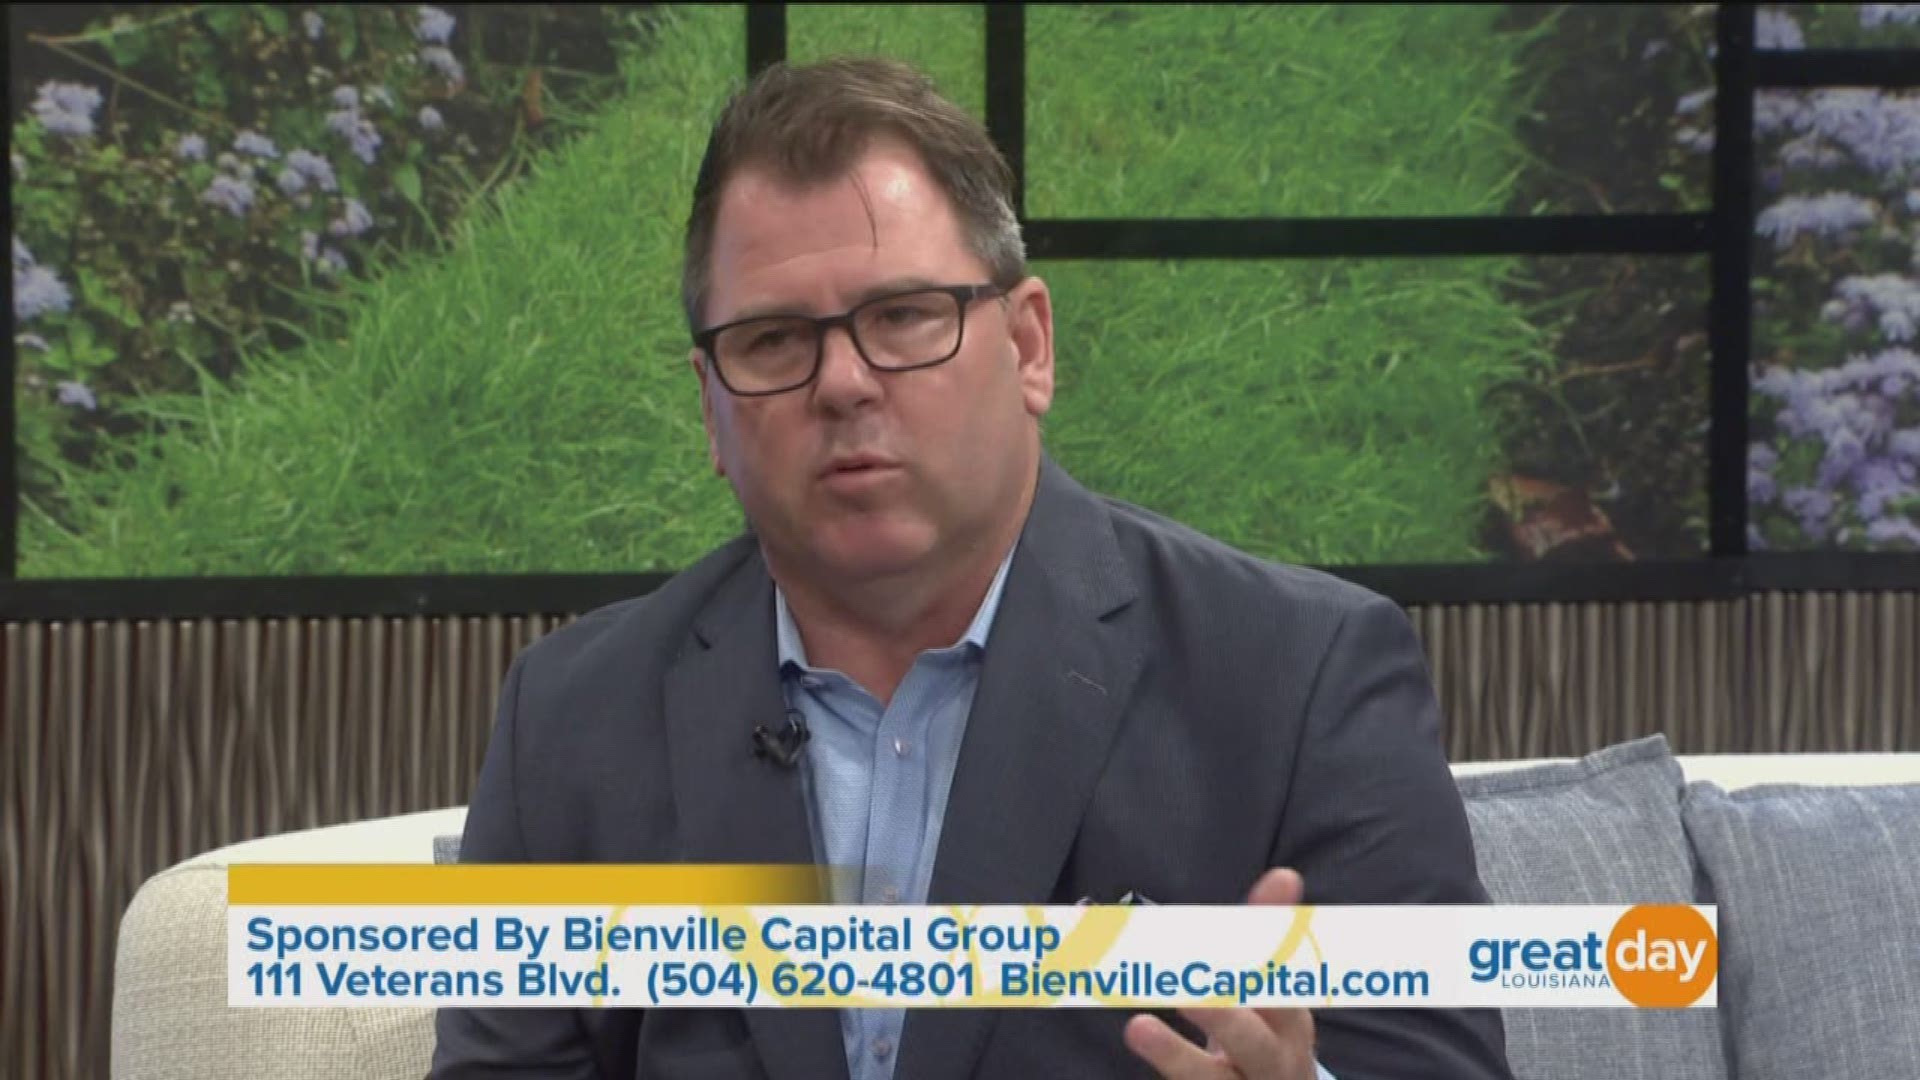 Emmett G. Dupas III - Wealth Management Advisor with Bienville Capital joins us again on Great Day to discuss "recession-proofing," your savings.